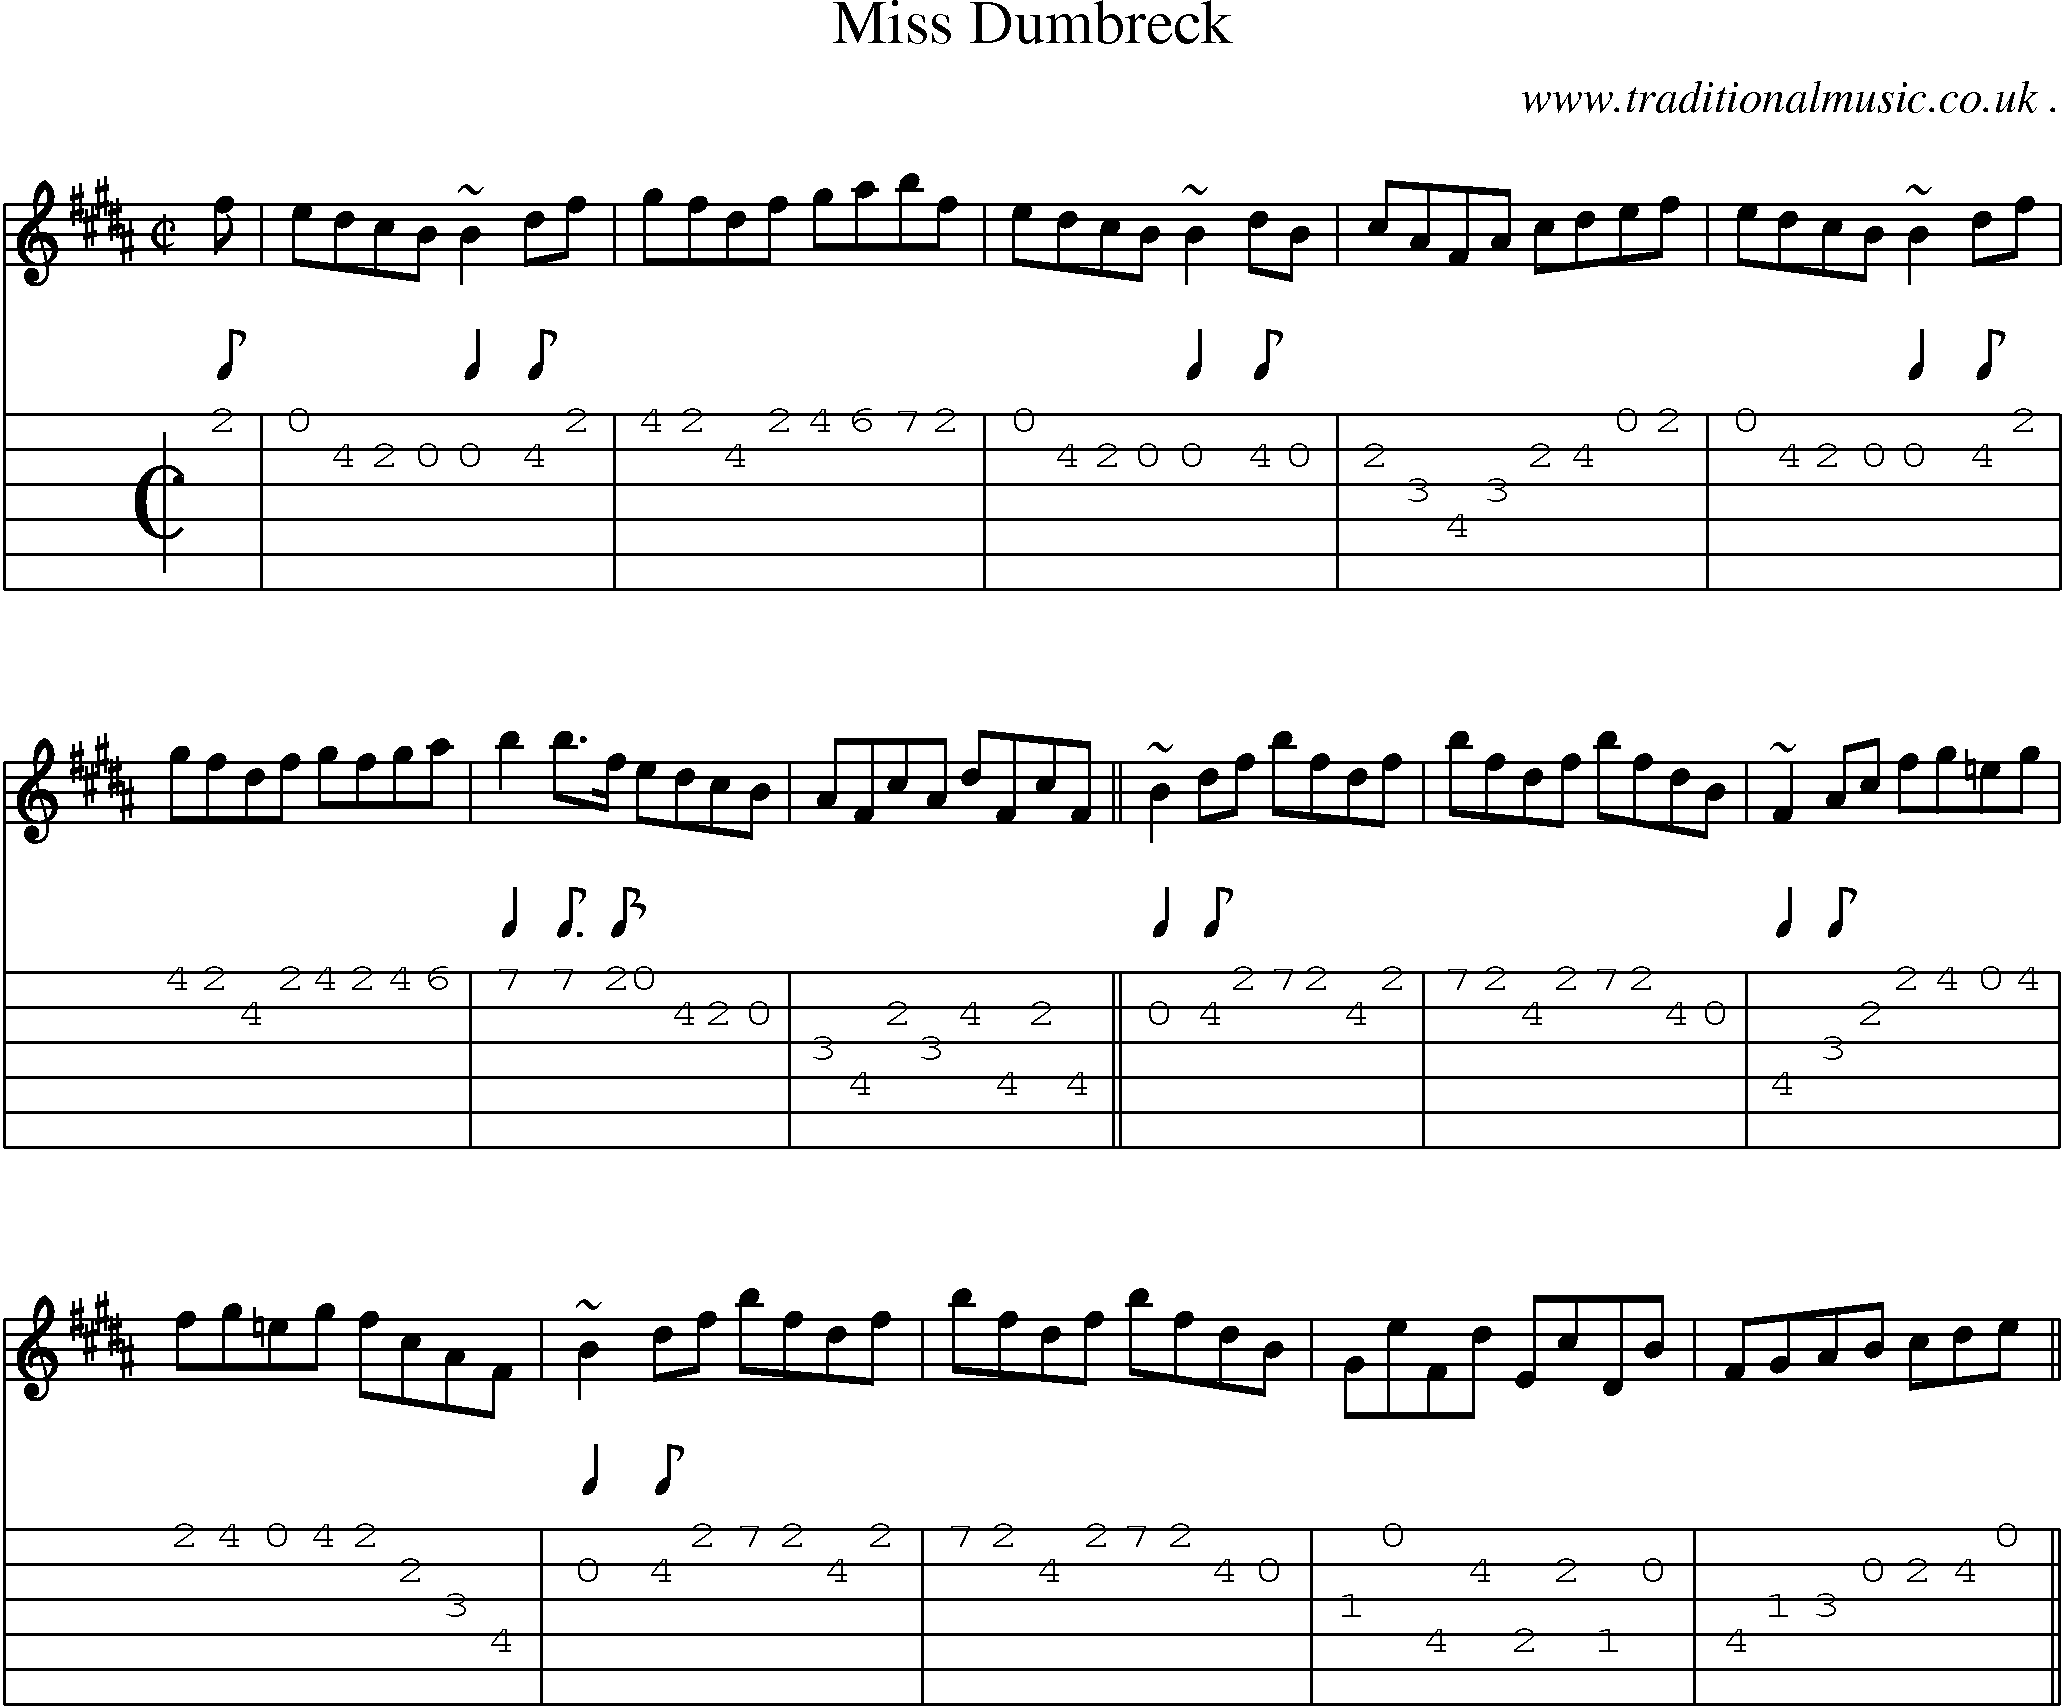 Sheet-music  score, Chords and Guitar Tabs for Miss Dumbreck